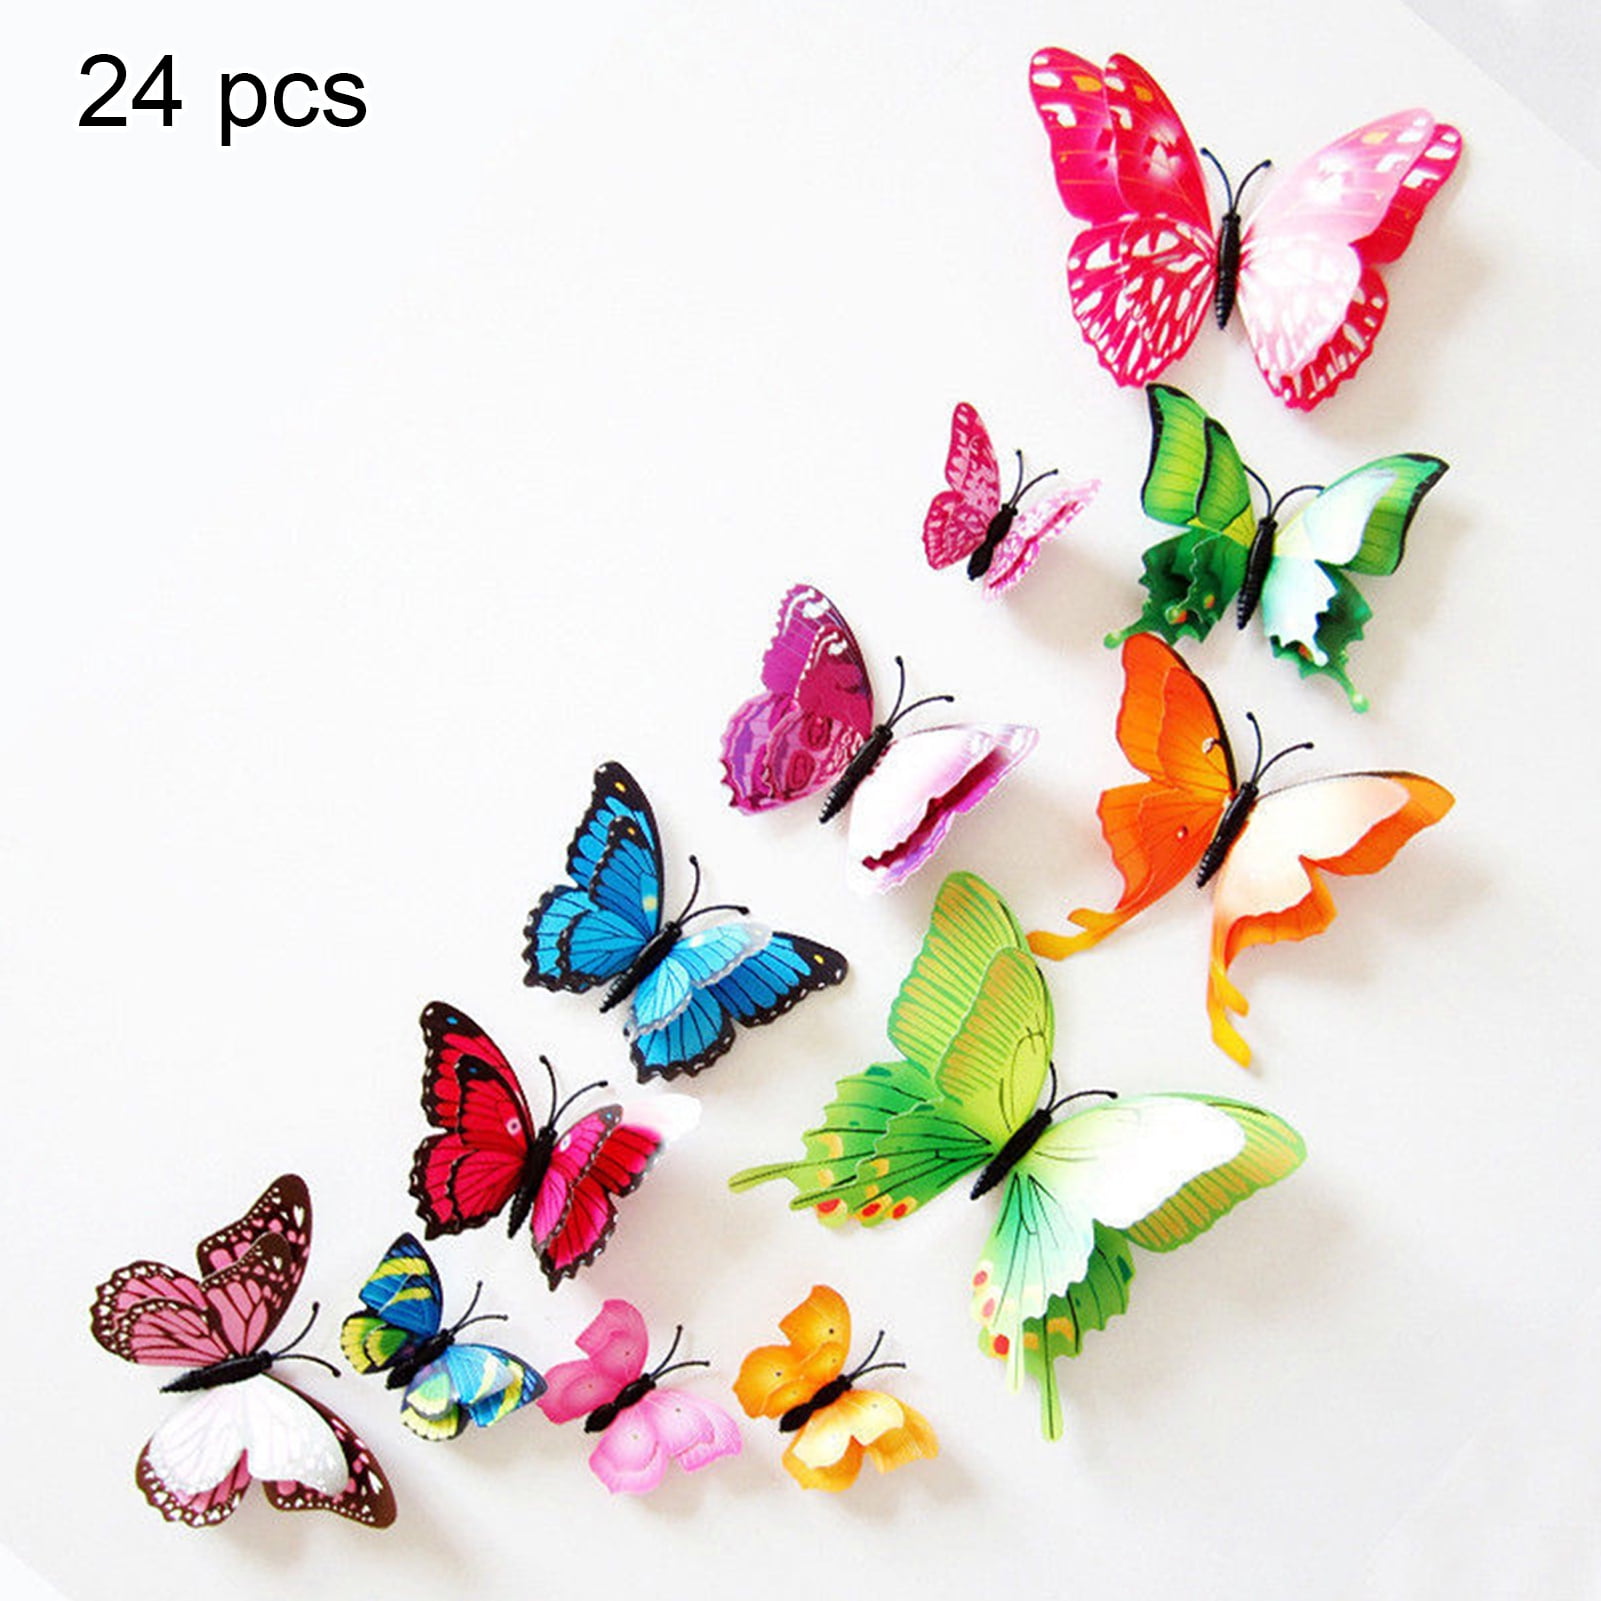 24pcs Art Decal Home Room Wall Stickers 3D Butterfly Sticker Decorations Decor 